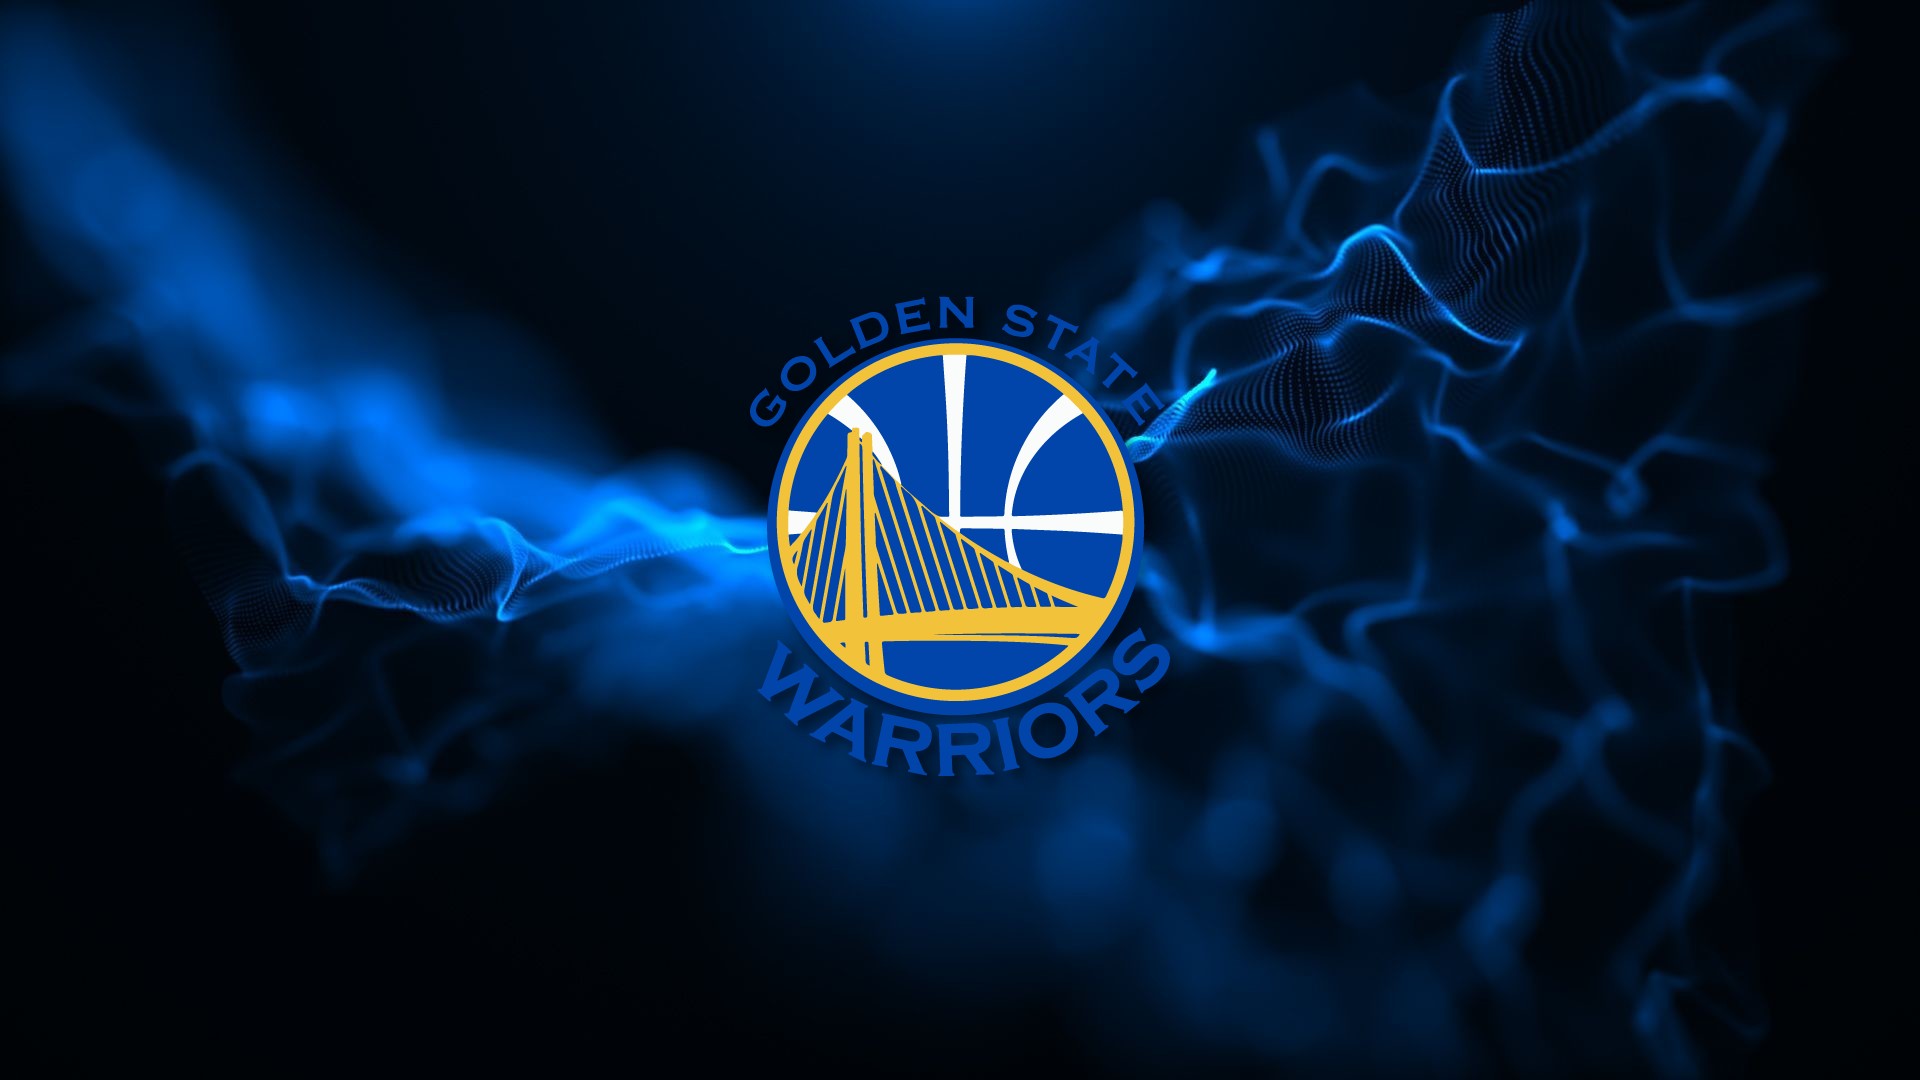 Golden State Warriors Wallpaper with resolution 1920X1080 pixel. You can use this wallpaper as background for your desktop Computer Screensavers, Android or iPhone smartphones